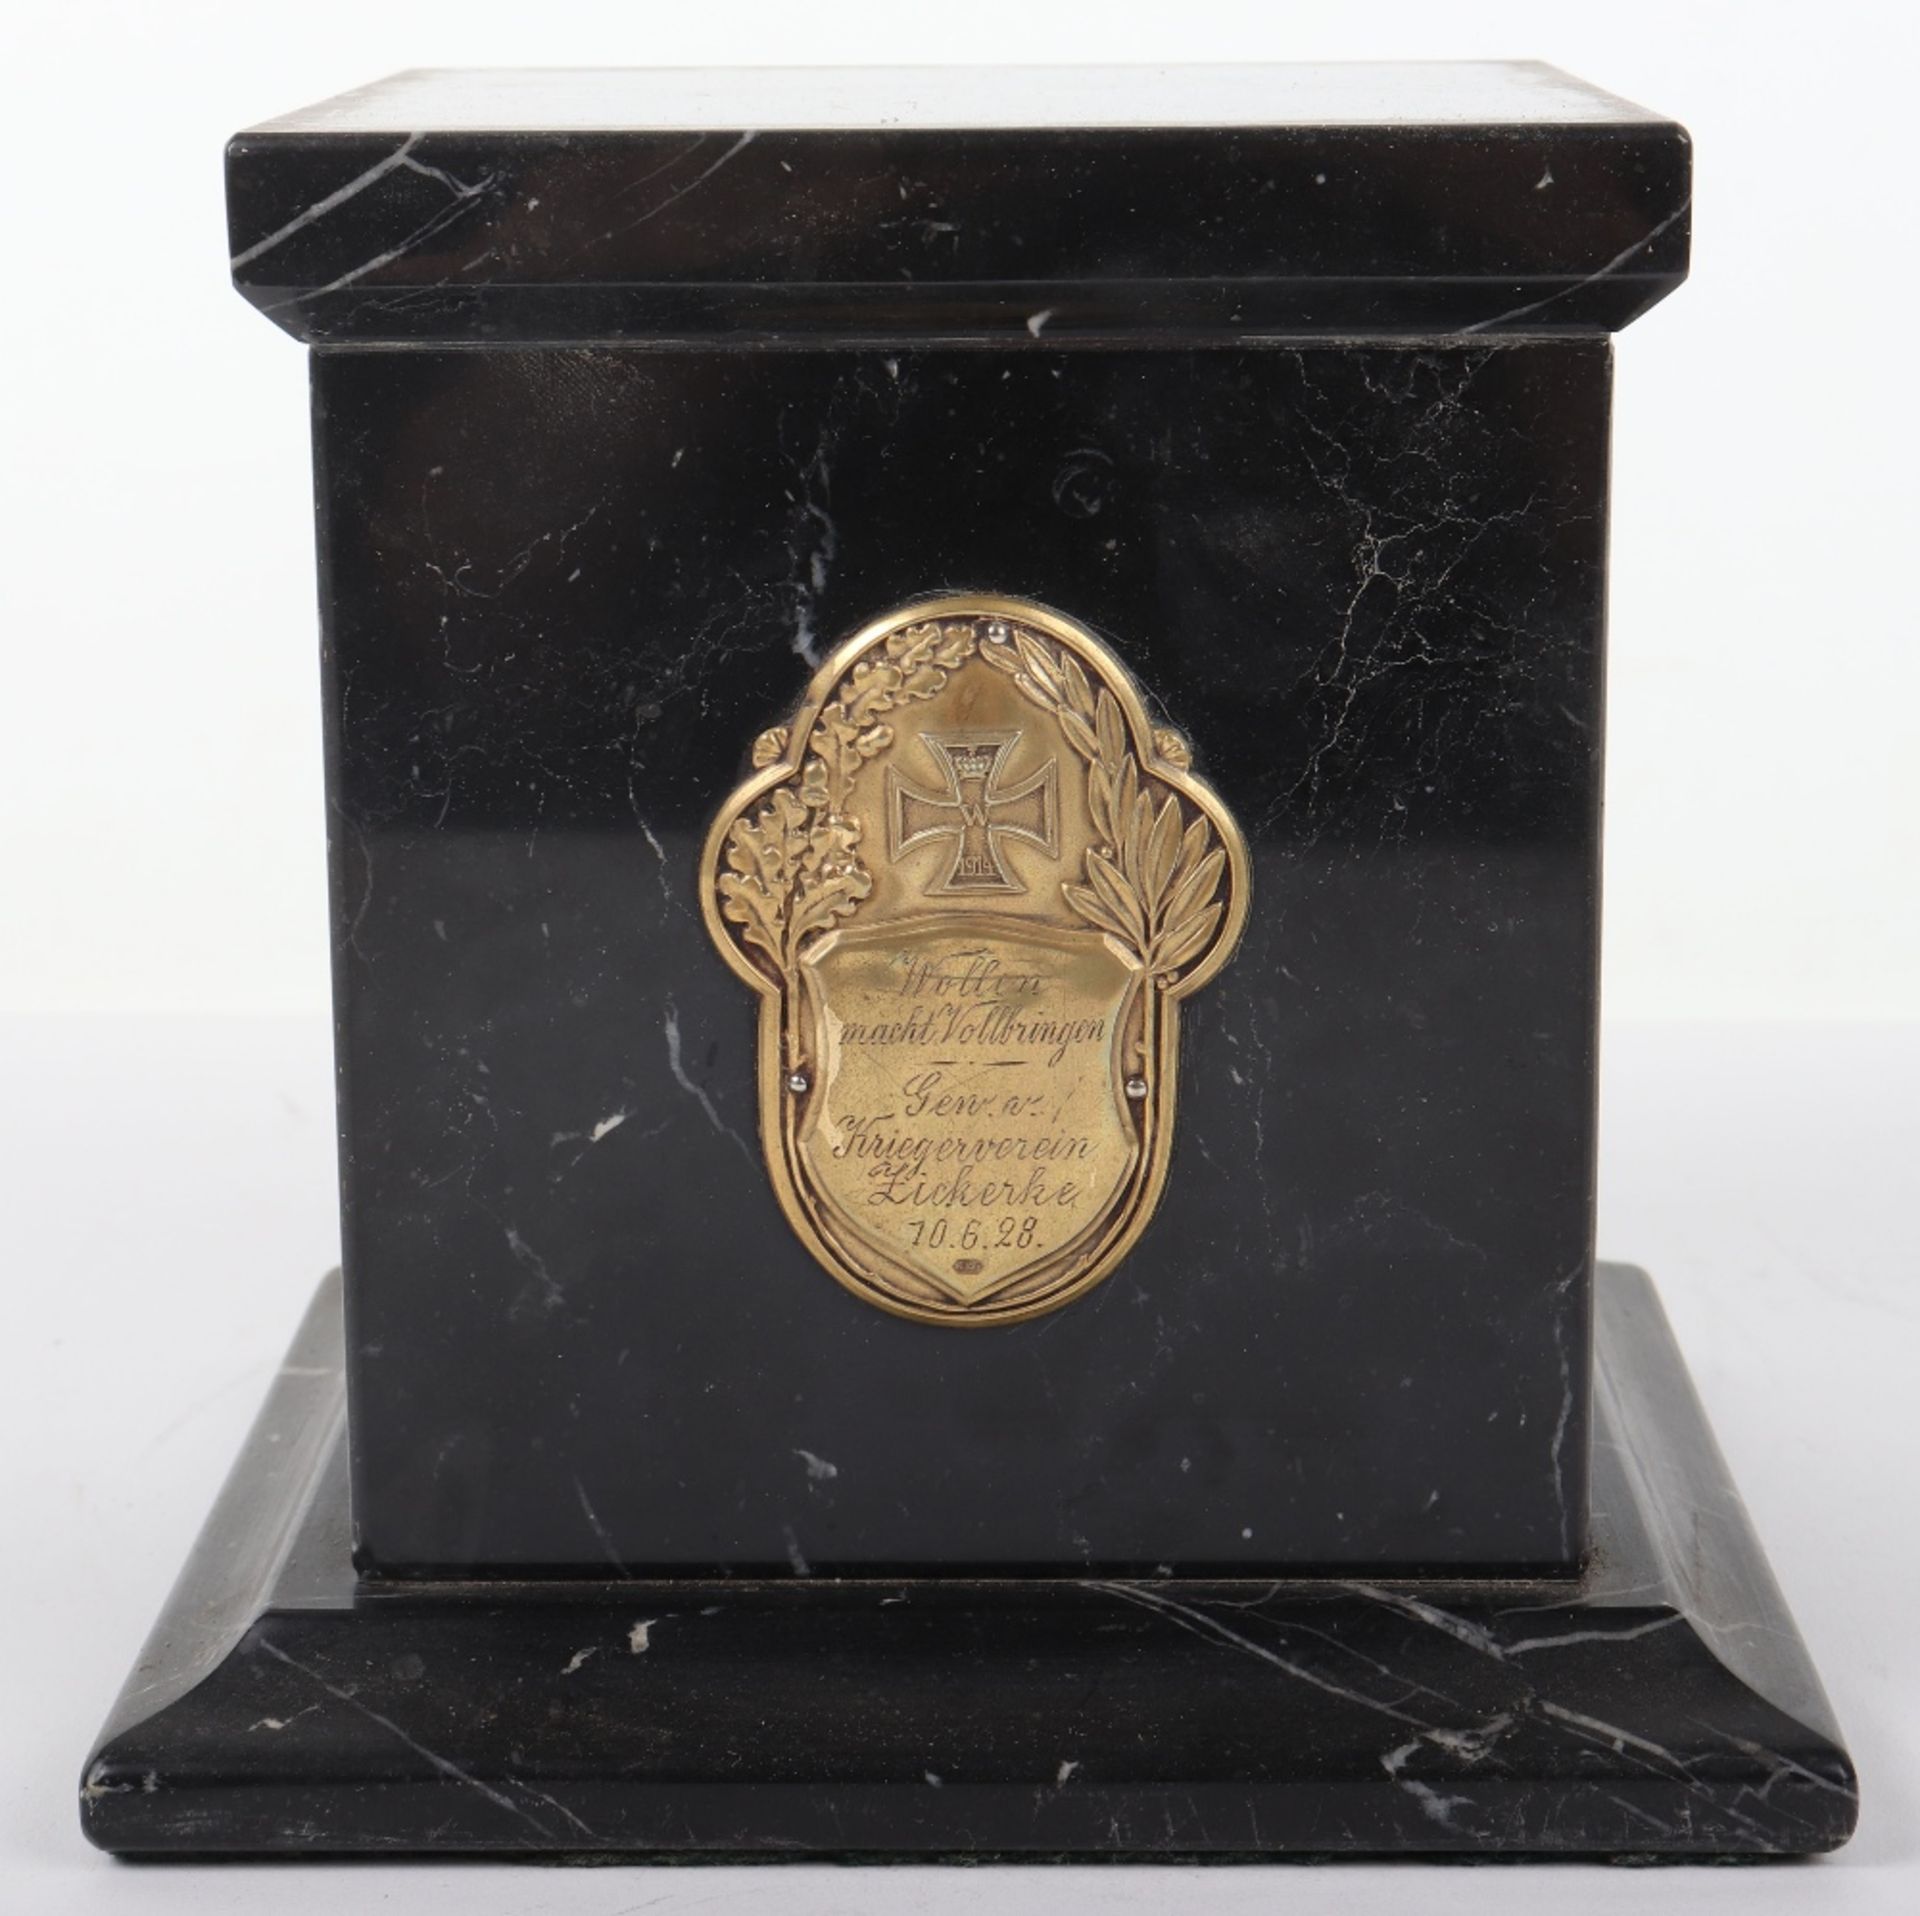 Marble Plinth with Presentation Plaque to Commemorate German War Association